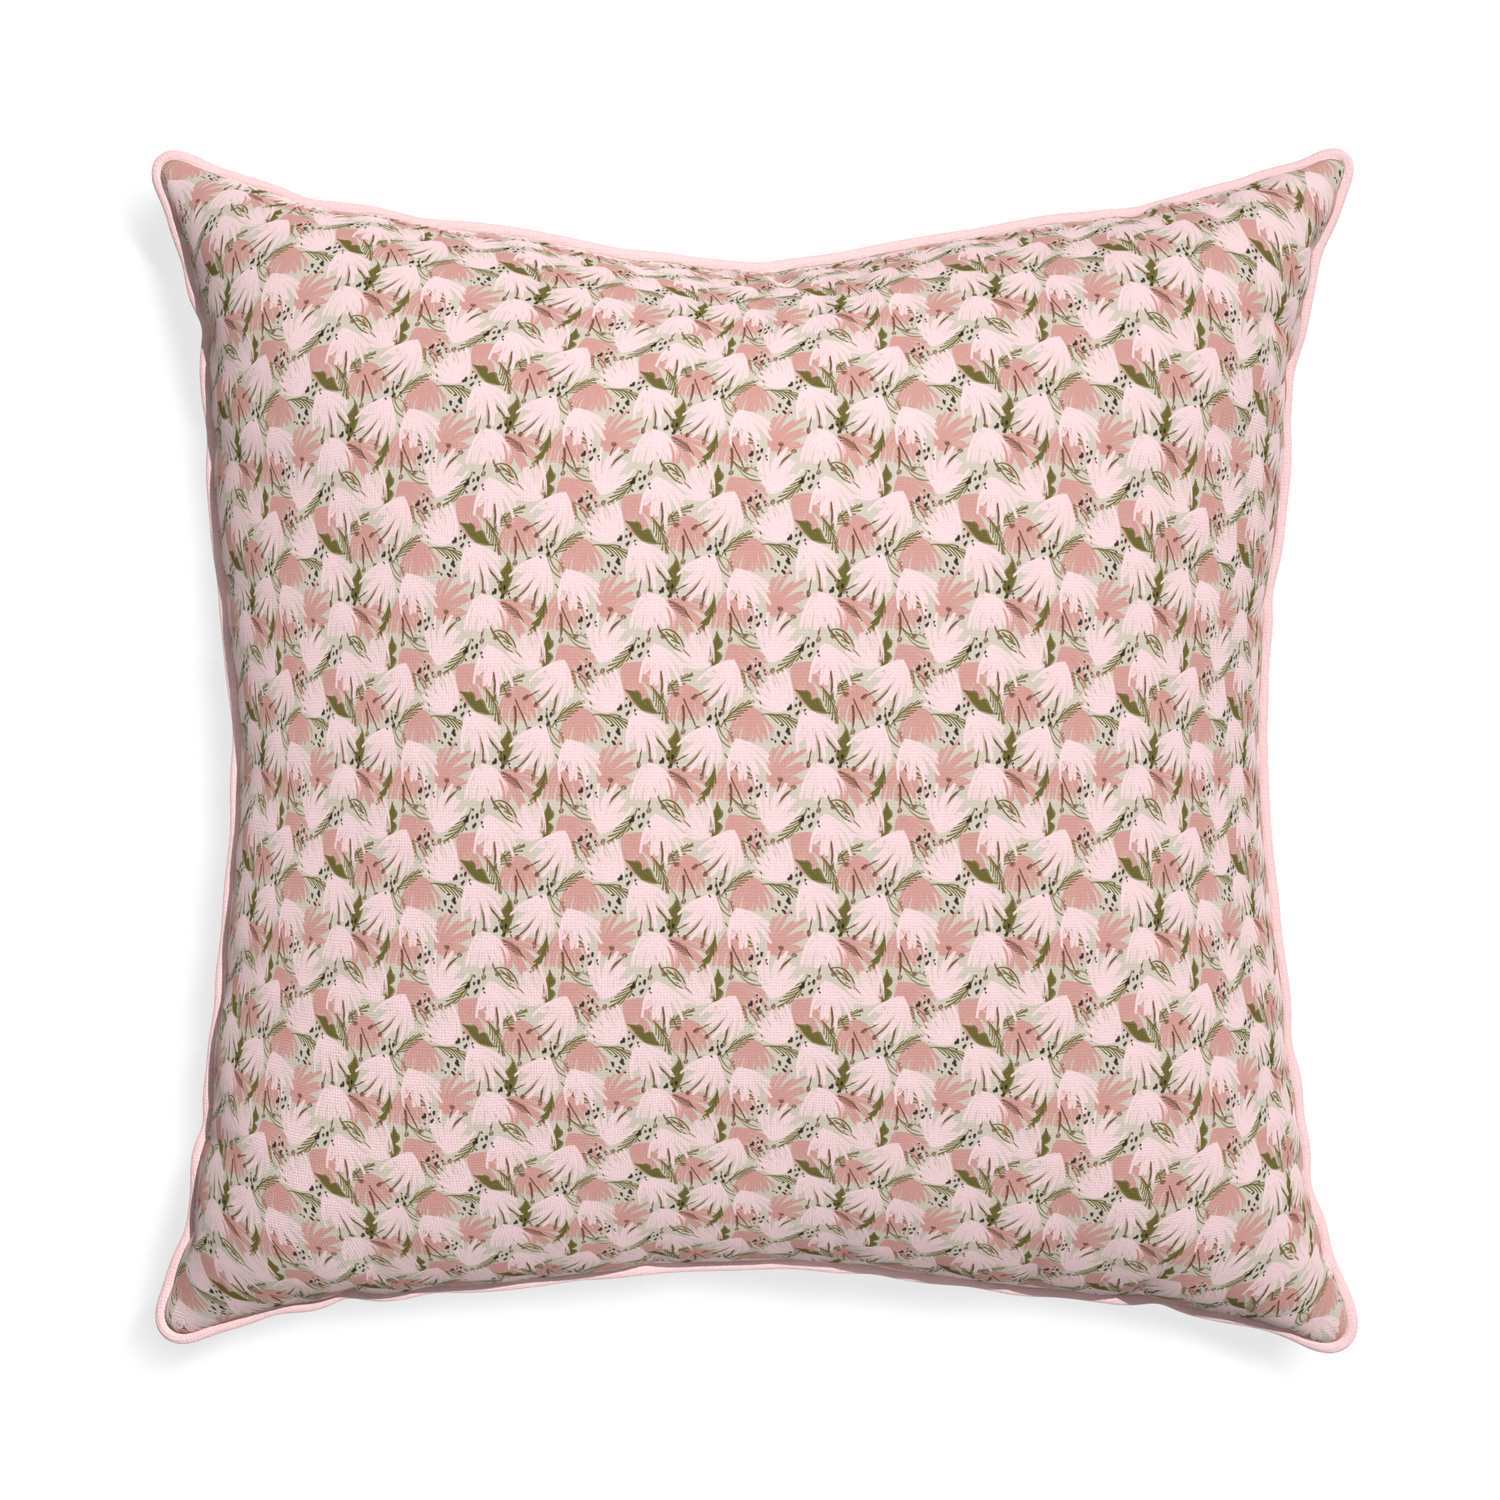 Euro-sham eden pink custom pink floralpillow with petal piping on white background